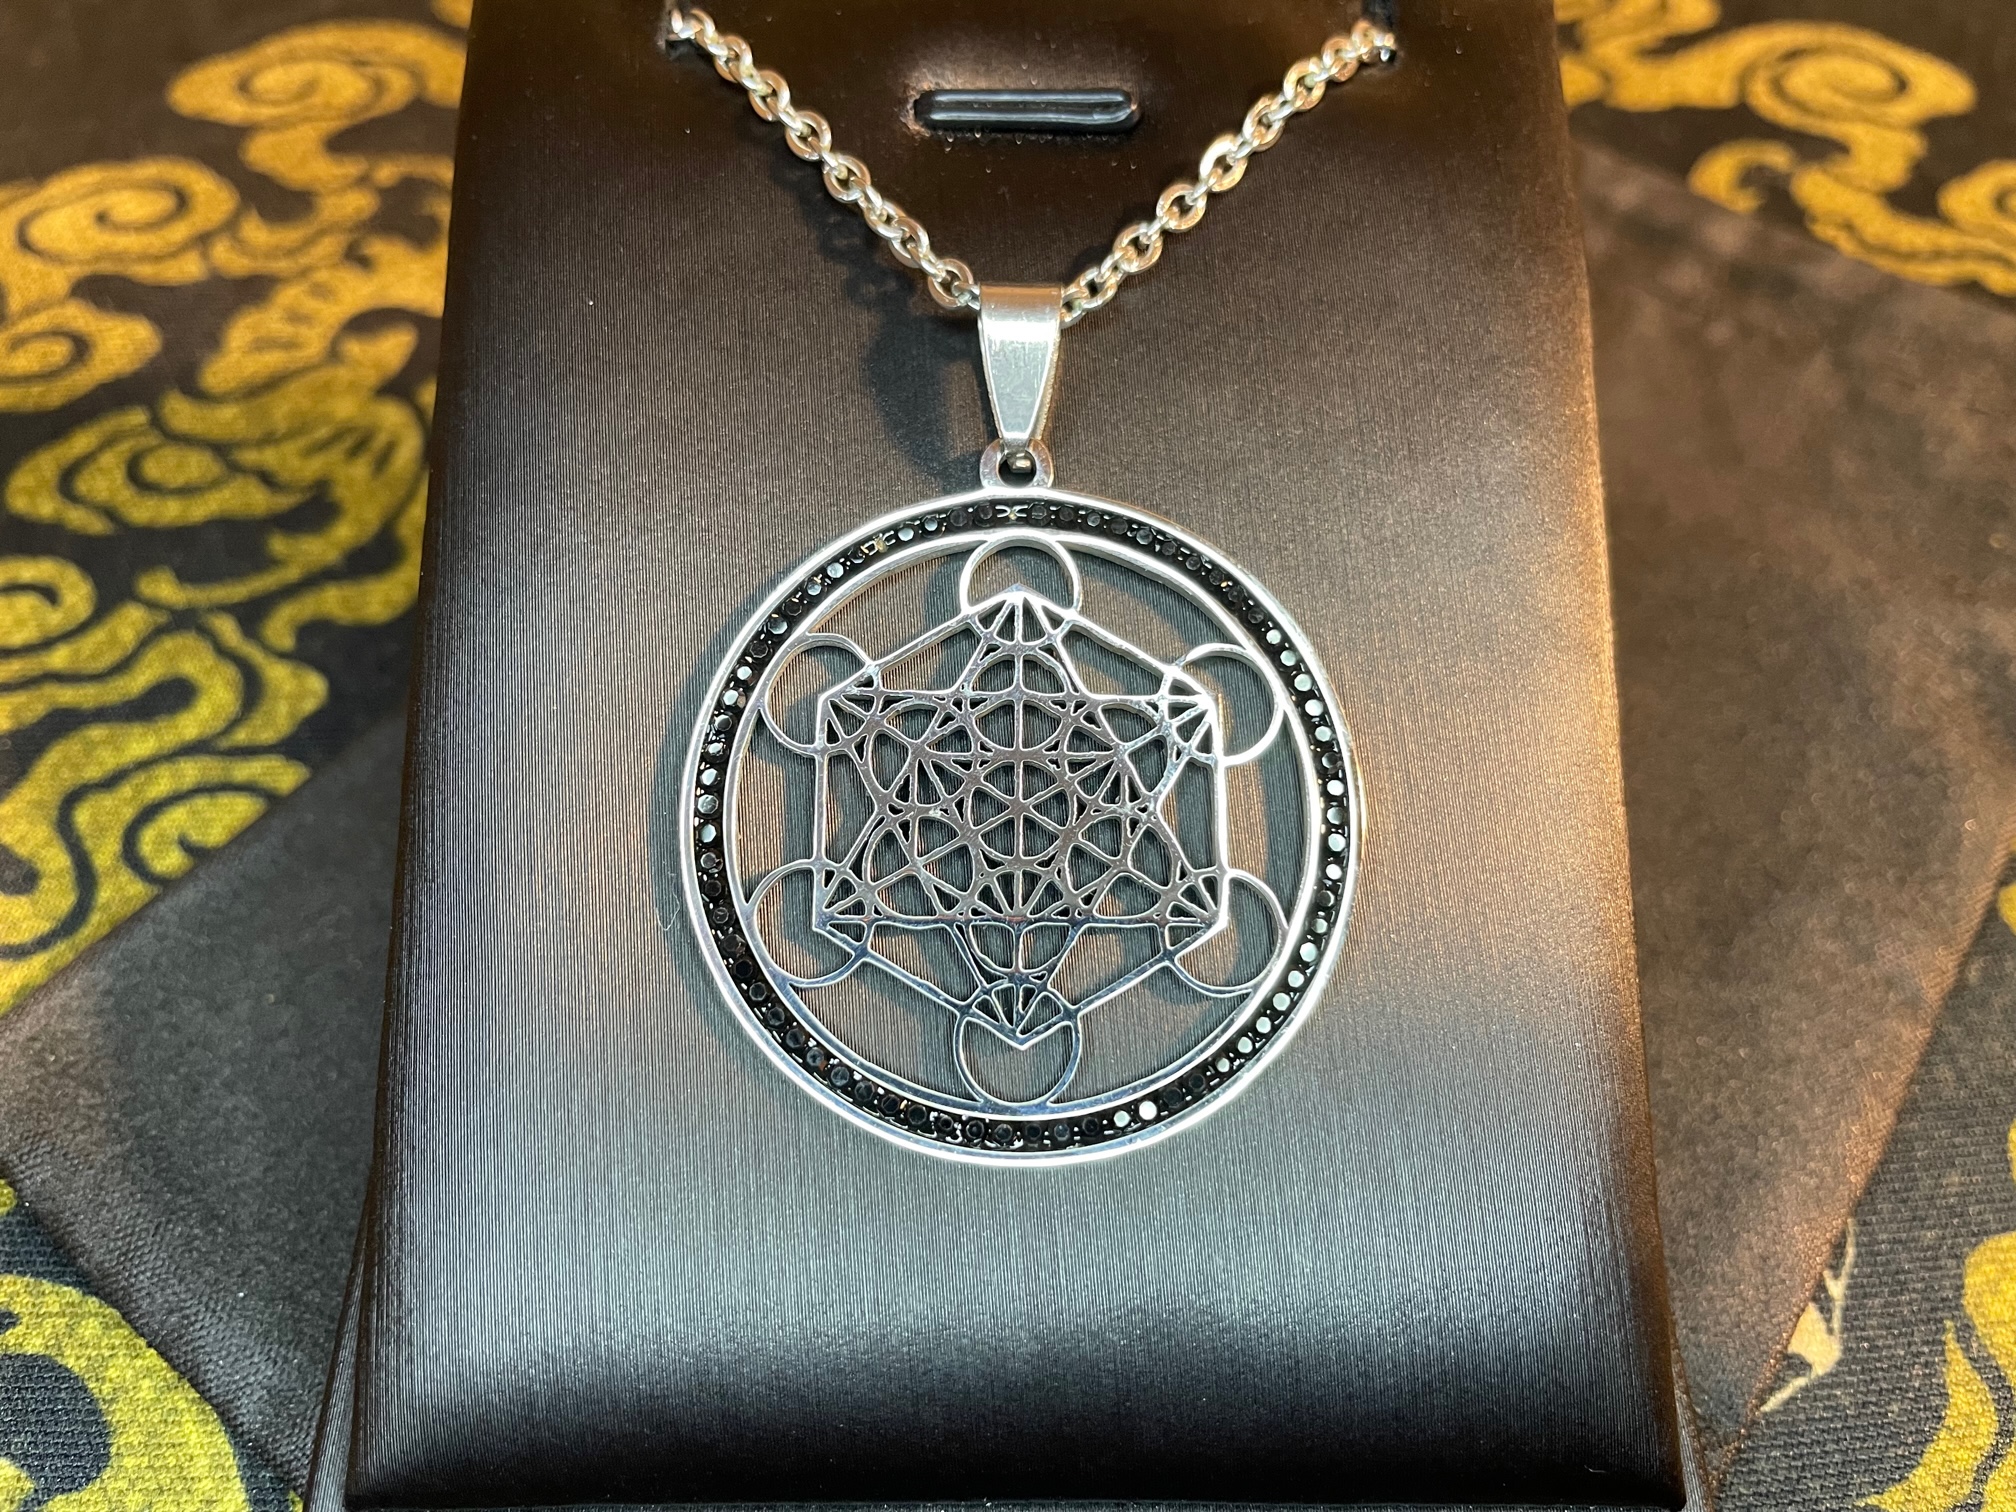 Check out the latest addition to my #etsy shop: Flower of Life Sacred Geometry Yoga Hindu Buddhism Diamond Encrusted Stainless Steel Pendant Necklace Pagan Occult Jewelry – #floweroflife #hindu #buddhism #yoga #occult #satanic #darknessjewelry